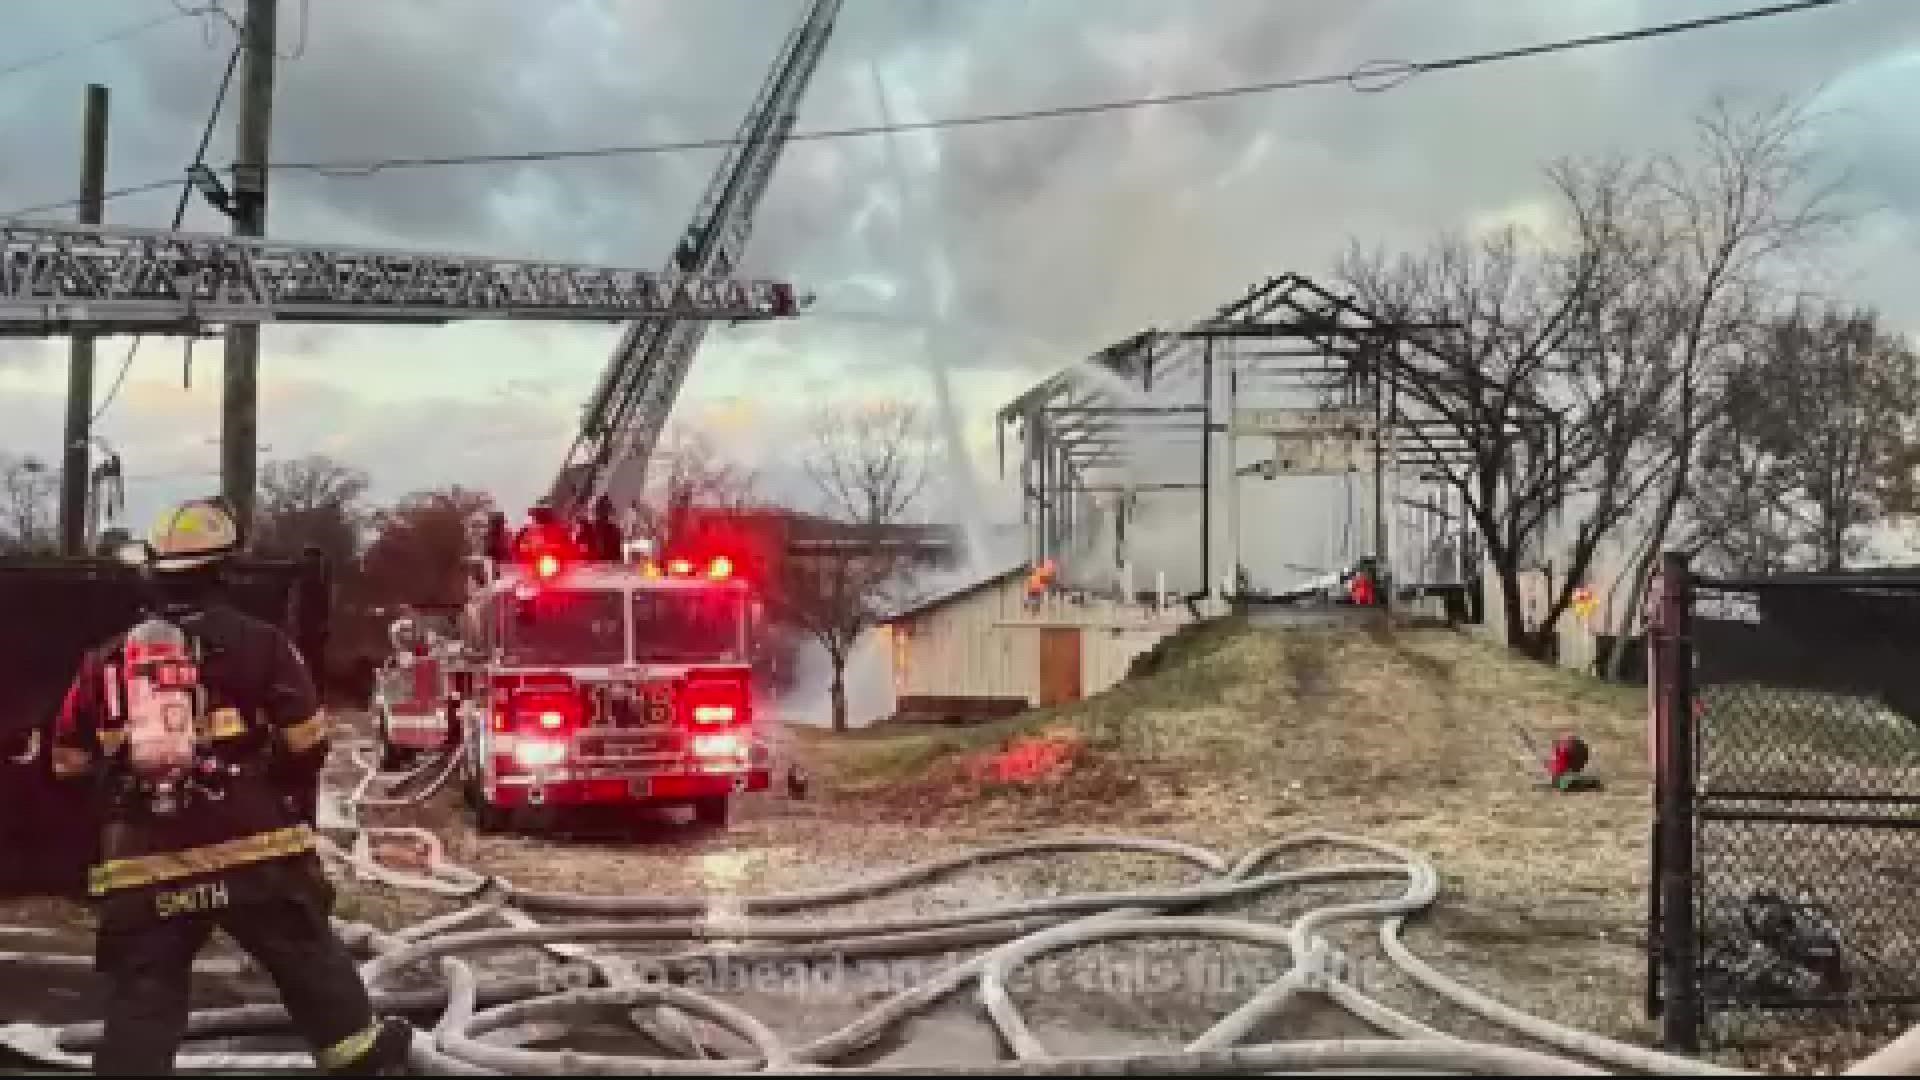 Firefighters responded to a two-alarm fire in the 2700 block of Martin Luther King Jr. Avenue Saturday.